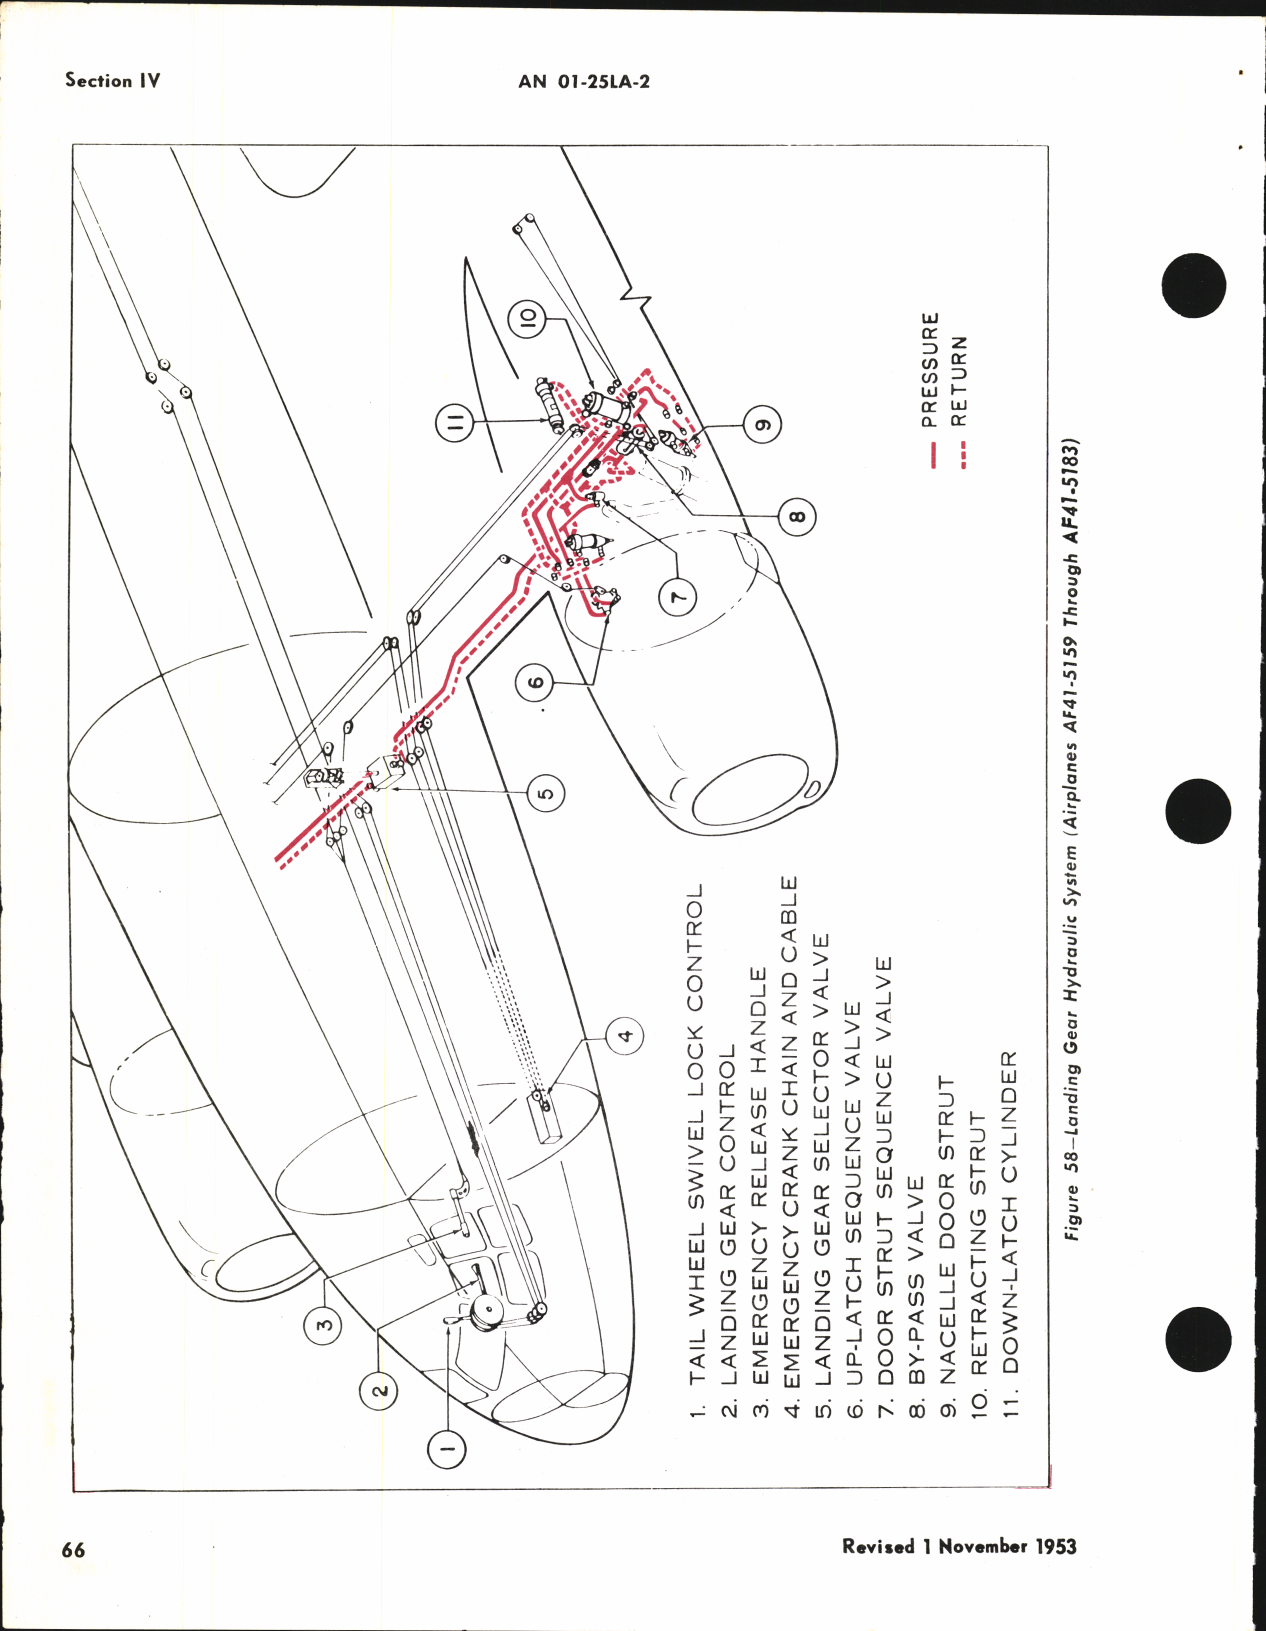 Sample page 6 from AirCorps Library document: Maintenance Instructions for C-46, ZC-46A, C-46D, C-46F, and R5C-1